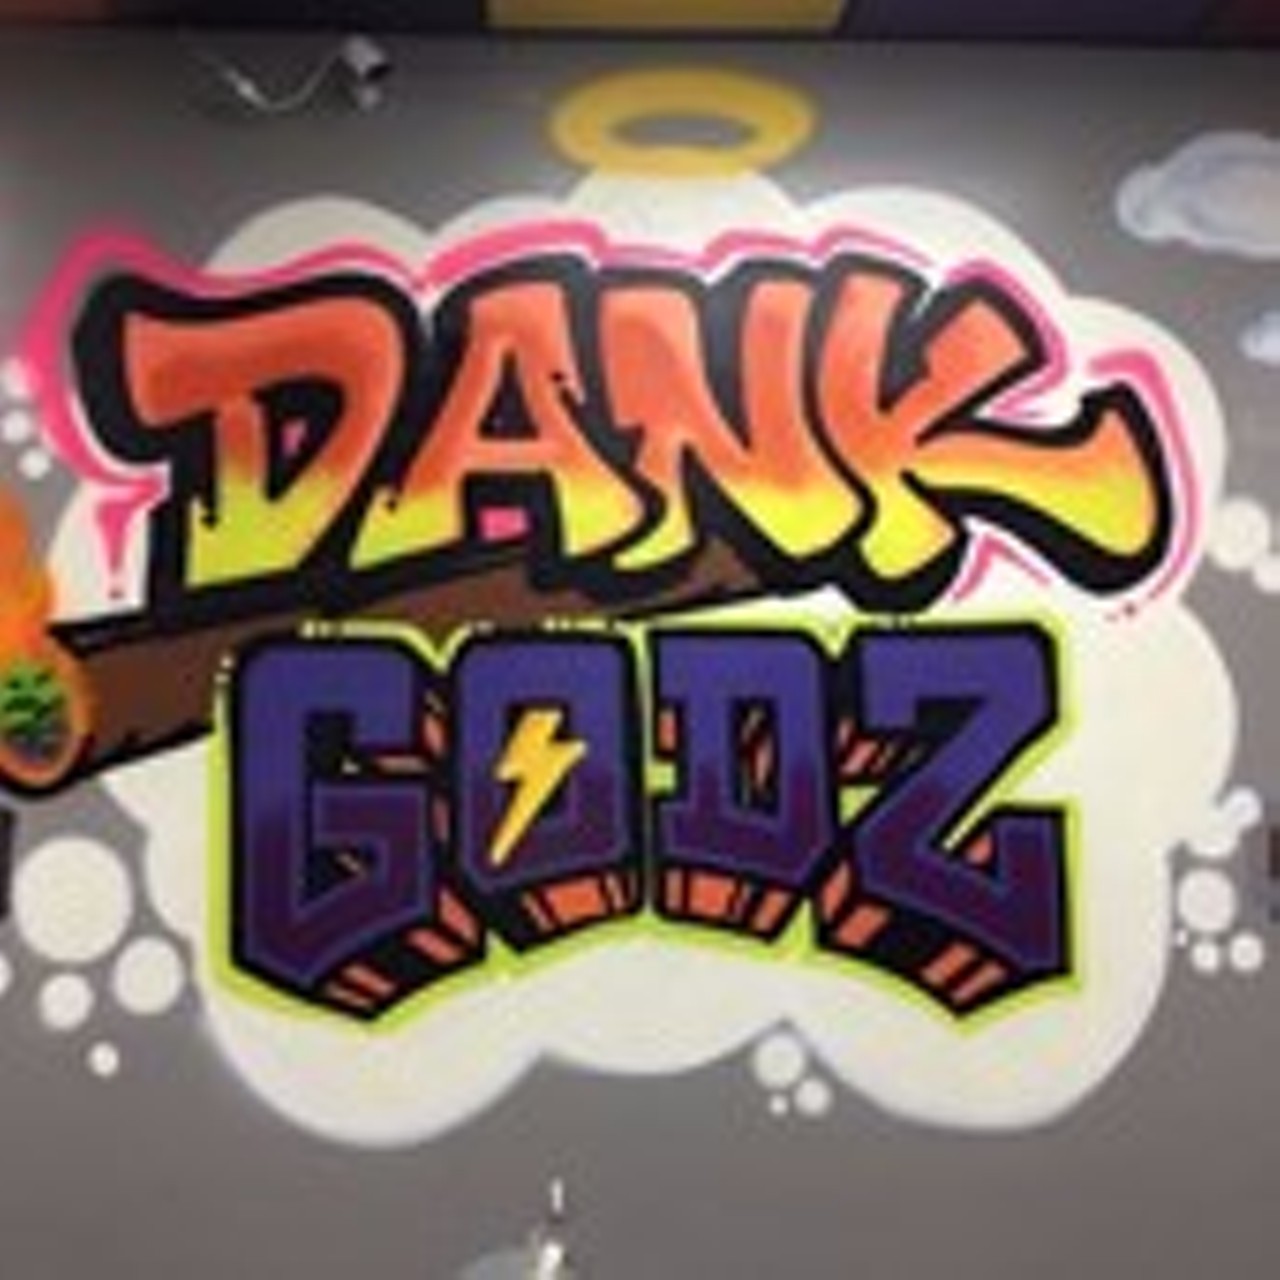 Dank Godz
Get some Dank weed in South East Detroit at Dank Godz and pick up some flowers, edibles or extract. 
13014 Gratiot Ave Detroit, MI 48205
(313)939-2873
